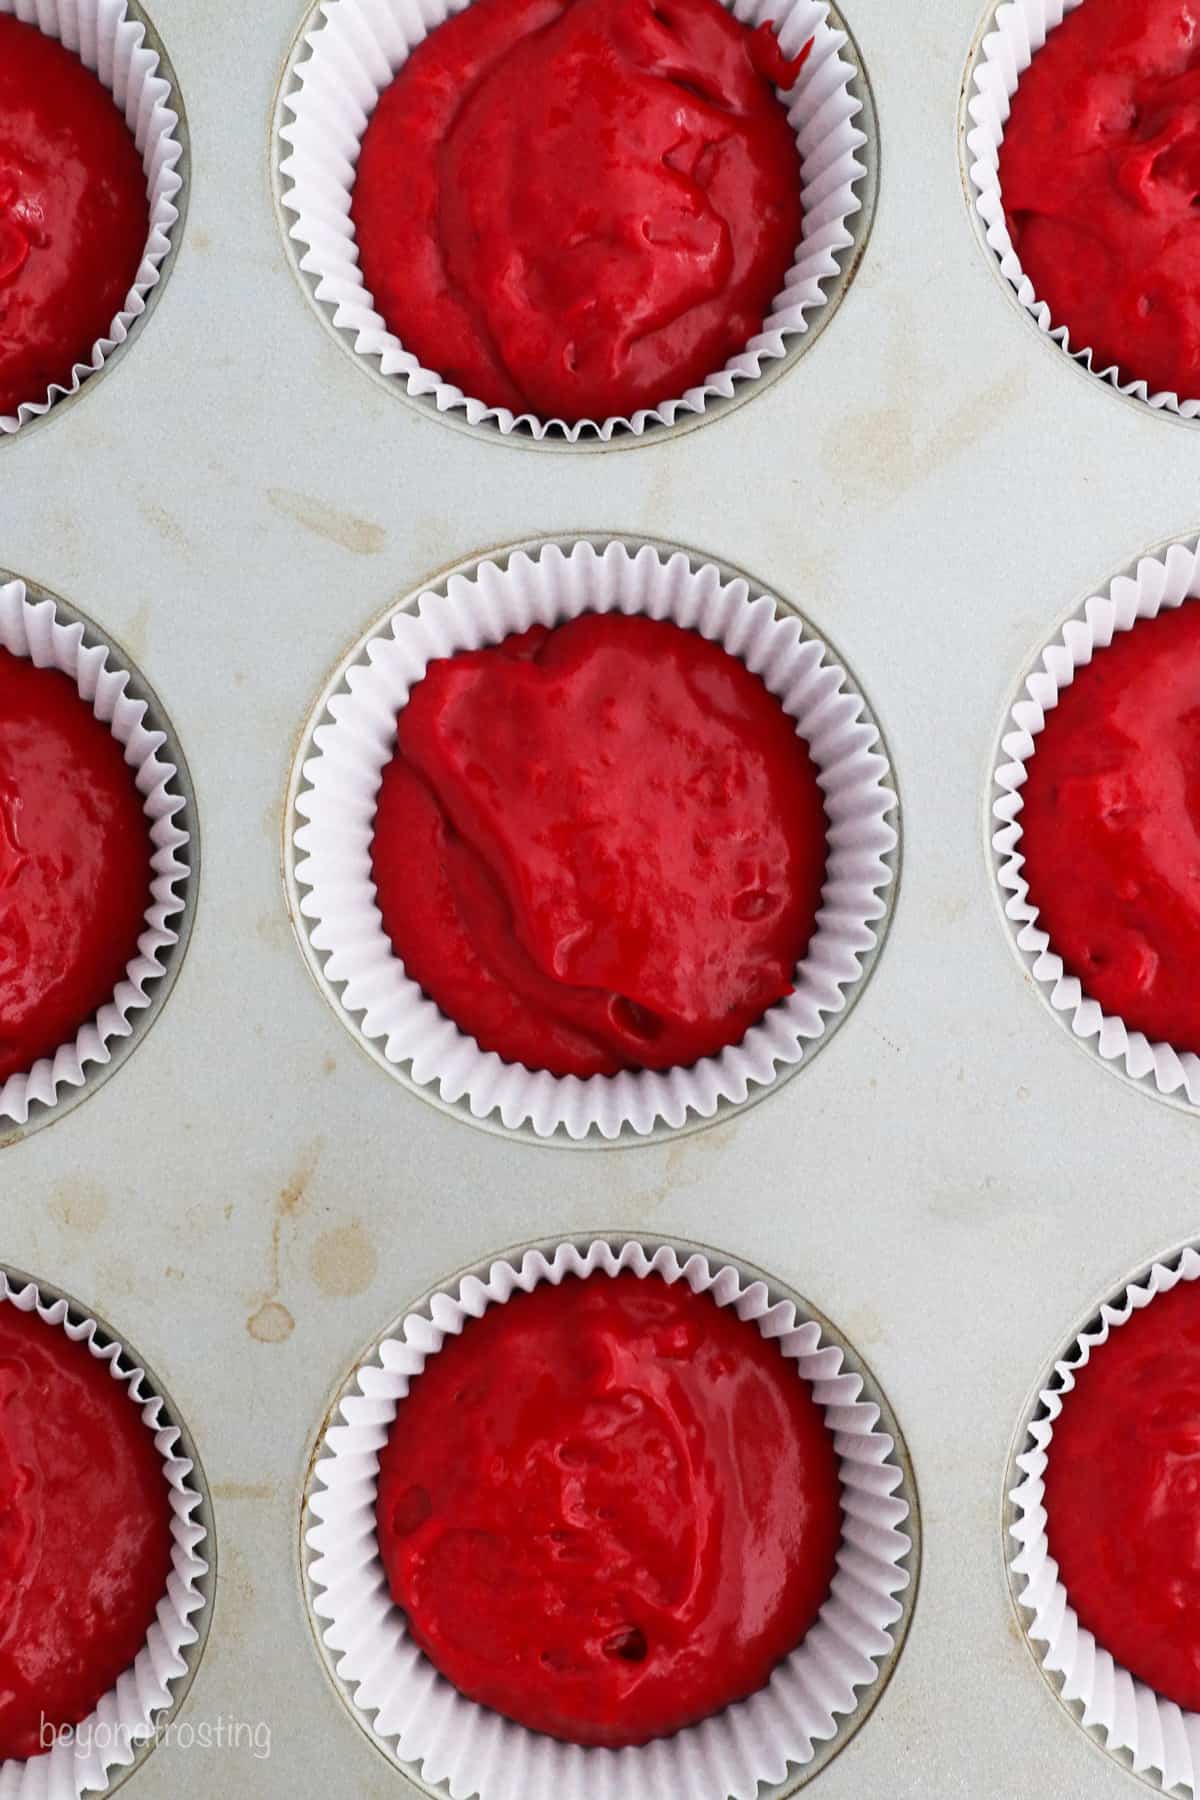 Overhead close up view of a lined cupcake pan filled with red velvet cake batter.